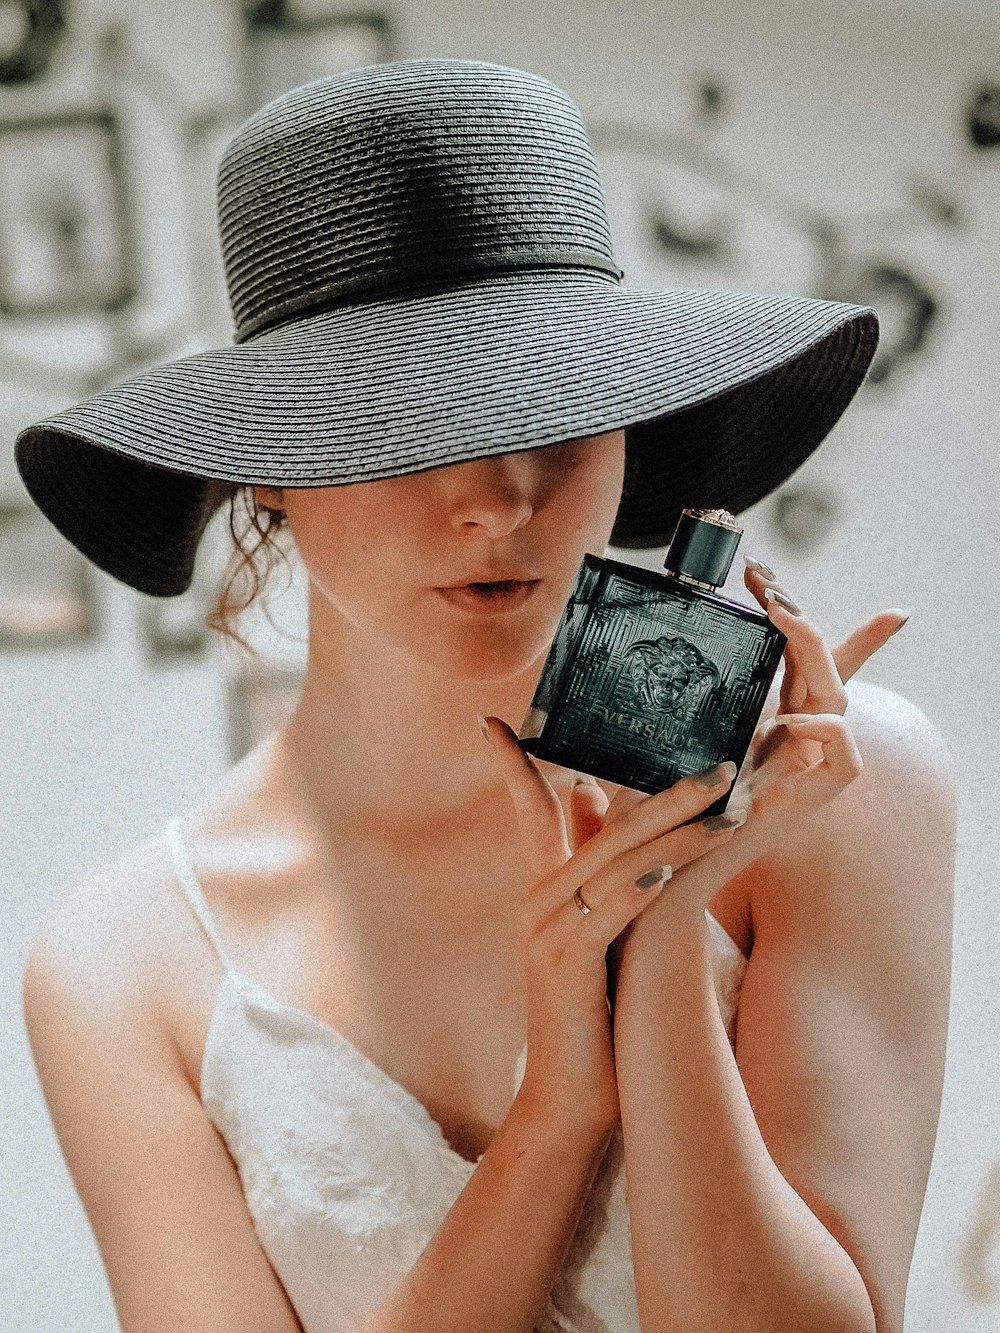 woman in white tank top holding black and silver camera